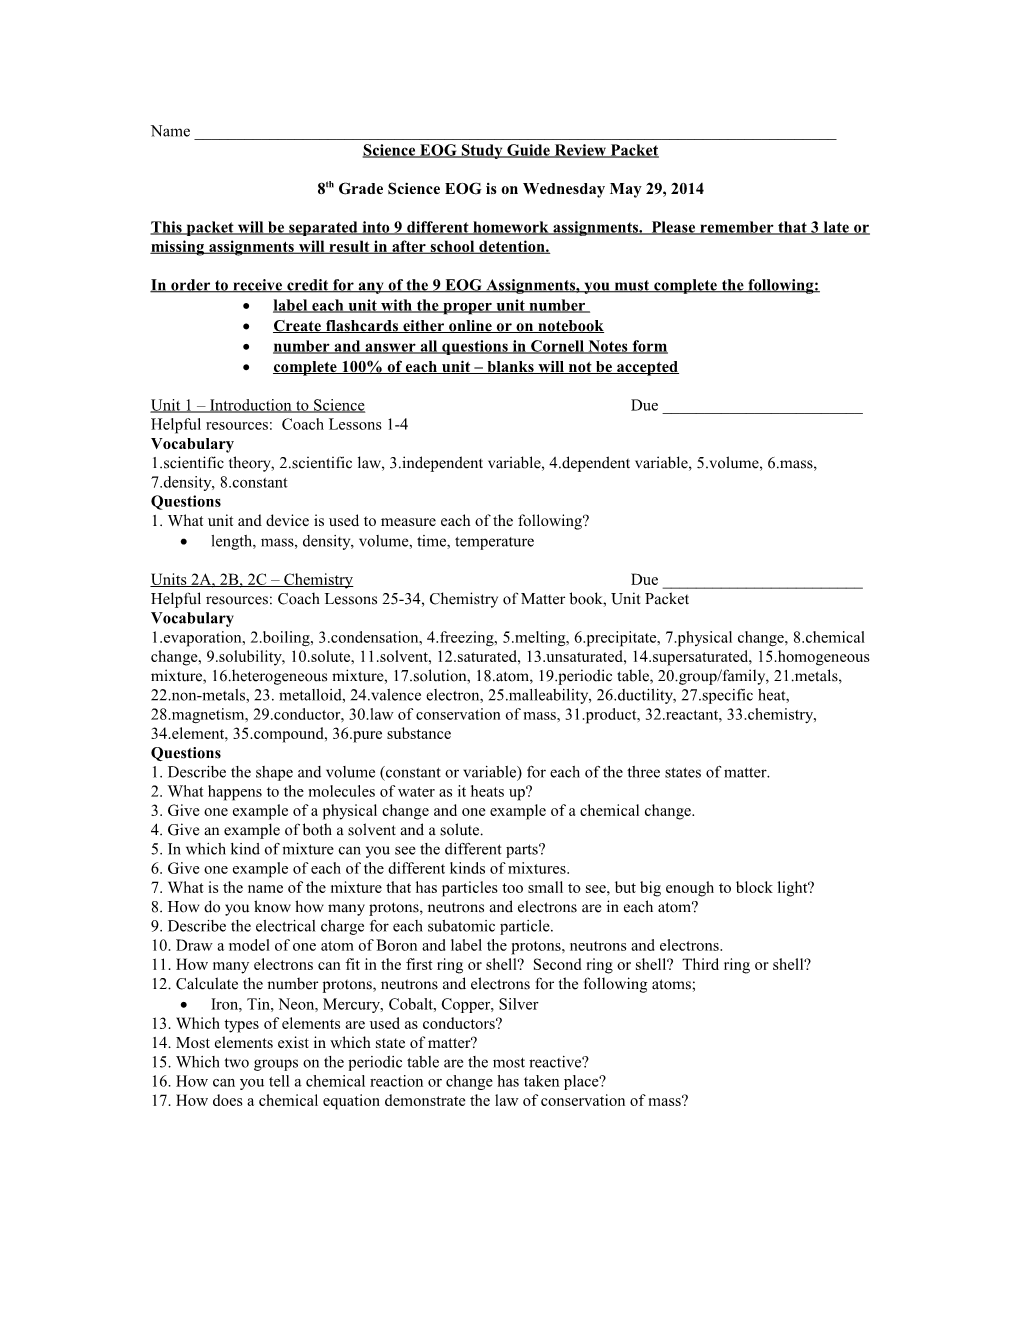 Science EOG Study Guide Review Packet